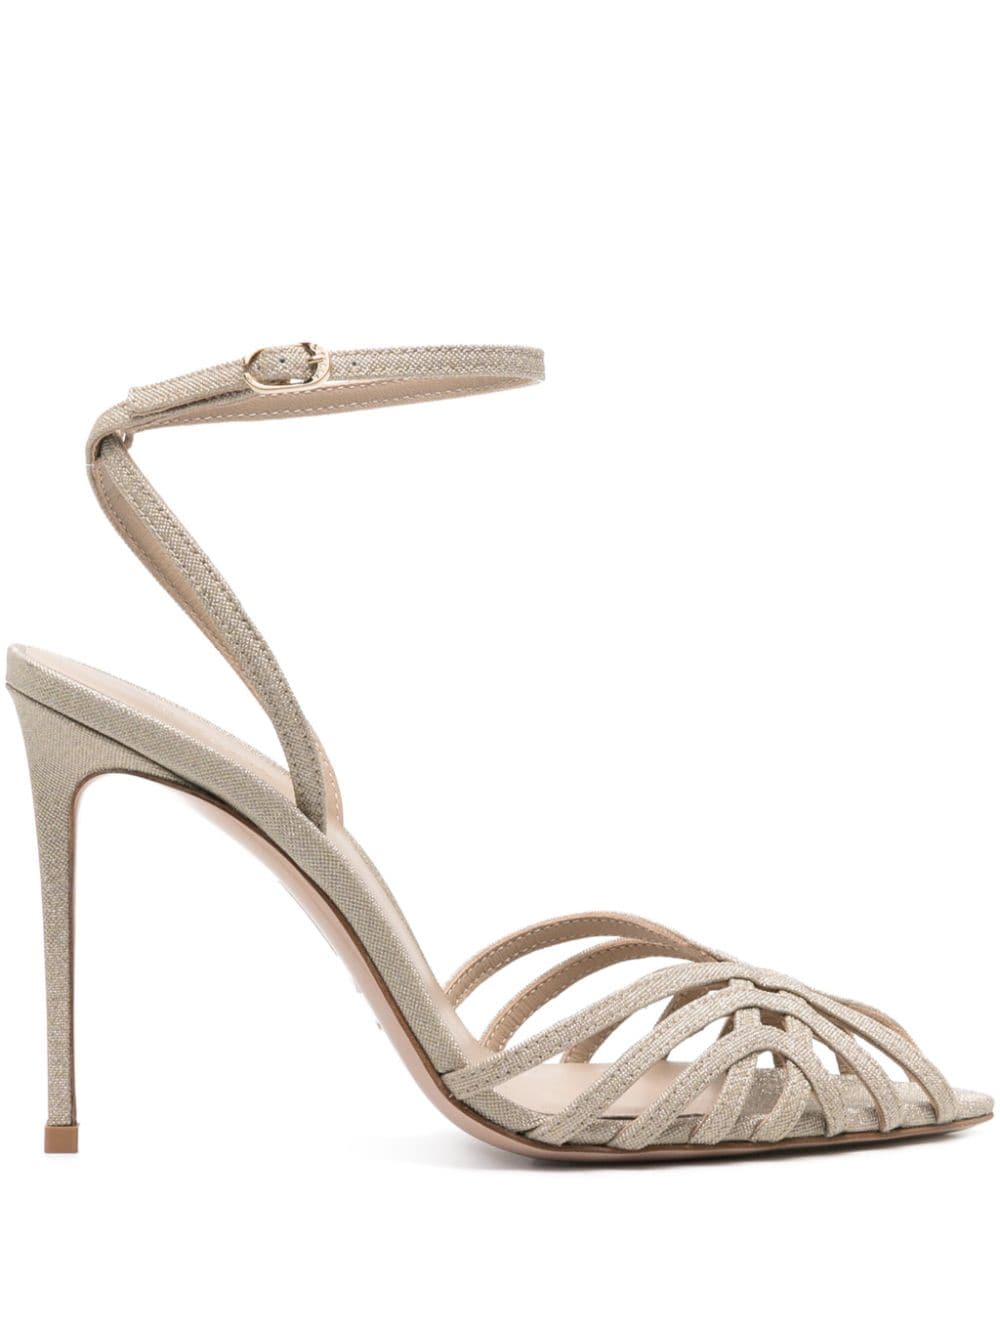 Le Silla Embrace 105mm Leather Sandals In Gold